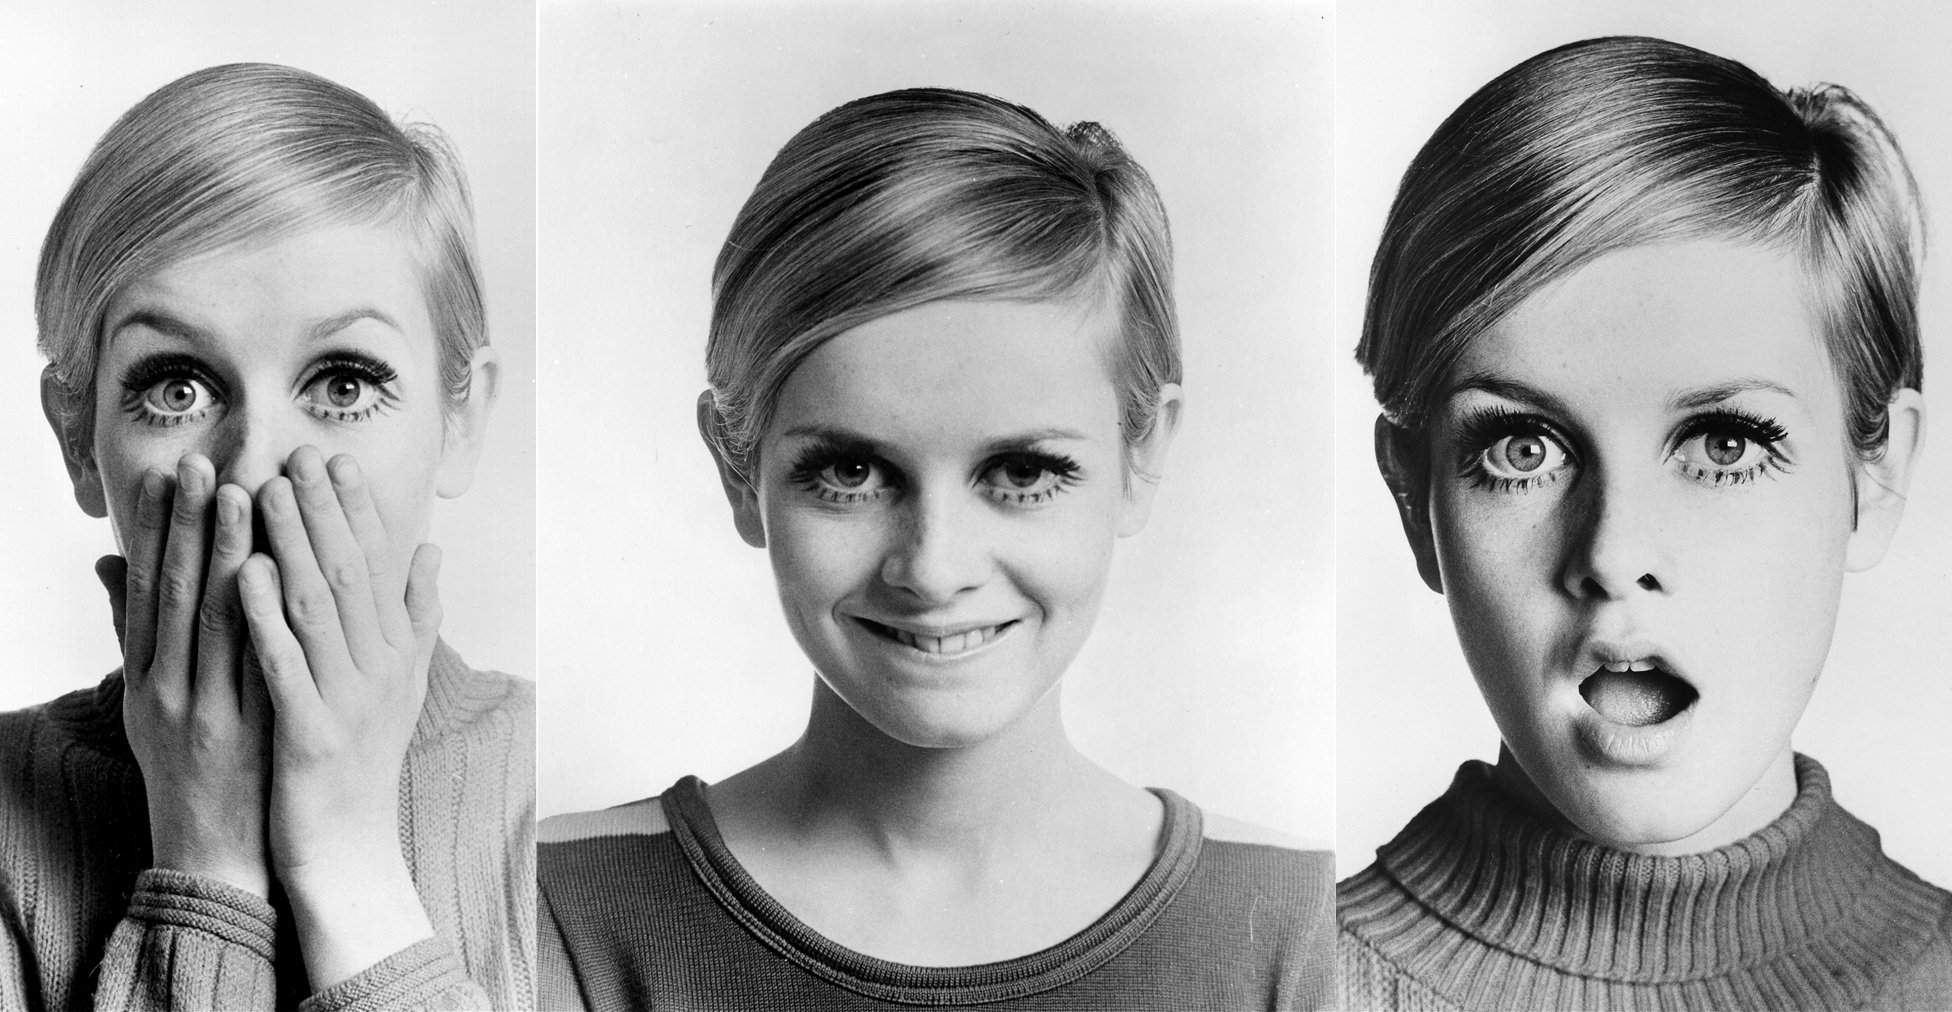 How To Get Twiggy's Eyes